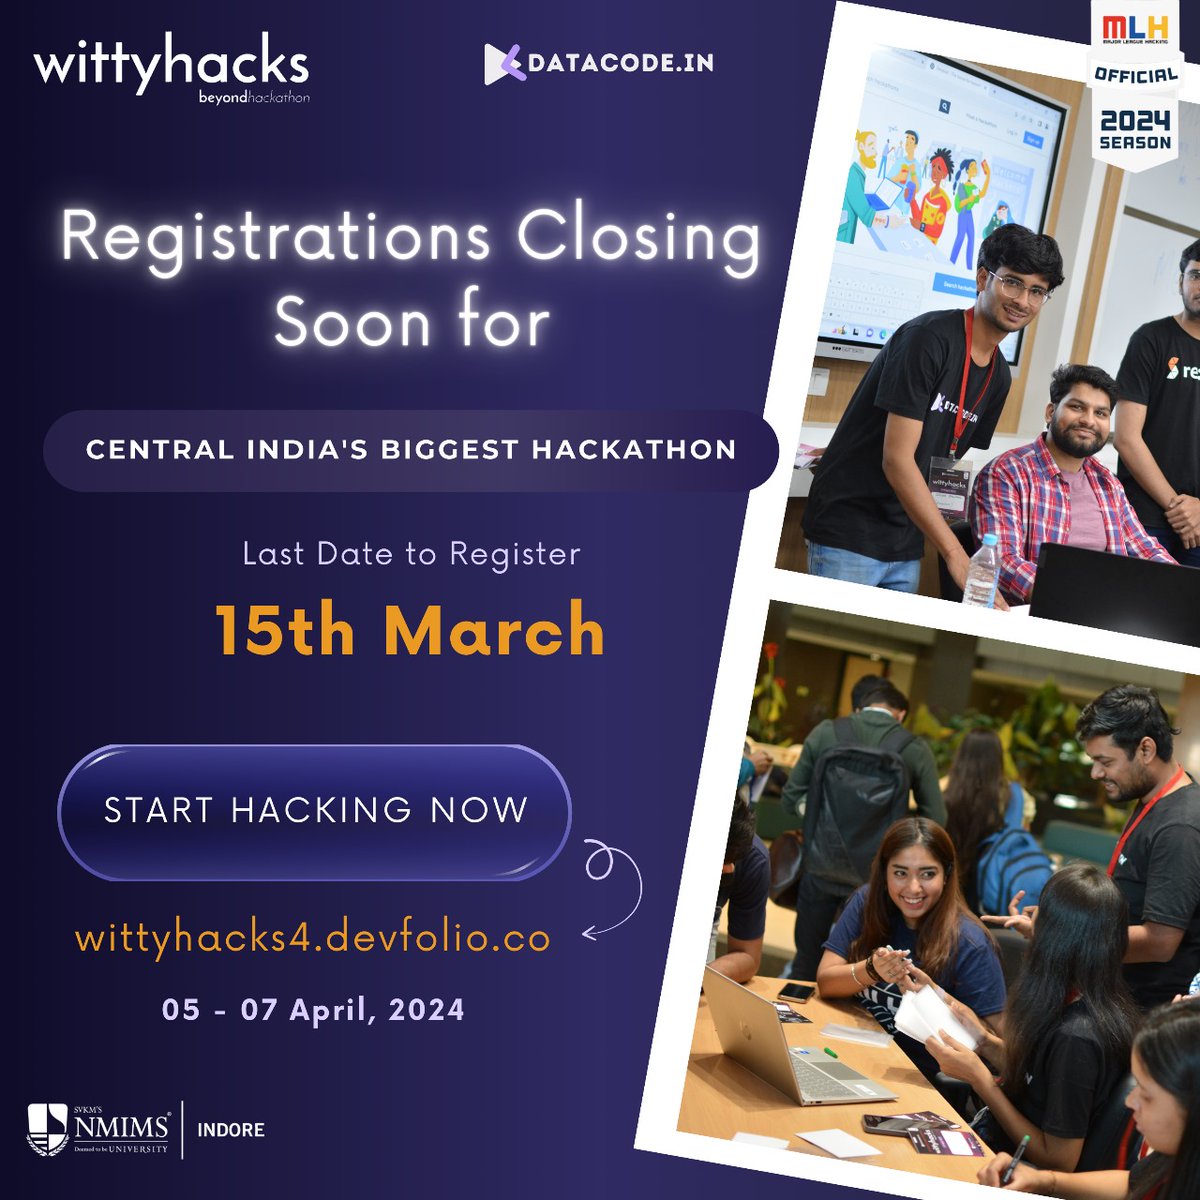 Hurry up! The registration for Wittyhacks is closing soon. 🔥 Don't miss out on the chance to showcase your skills, innovate, and win exciting prizes.💖 Register now to be a part of Central India's biggest community hackathon. 🚀💻 wittyhacks4.devfolio.co